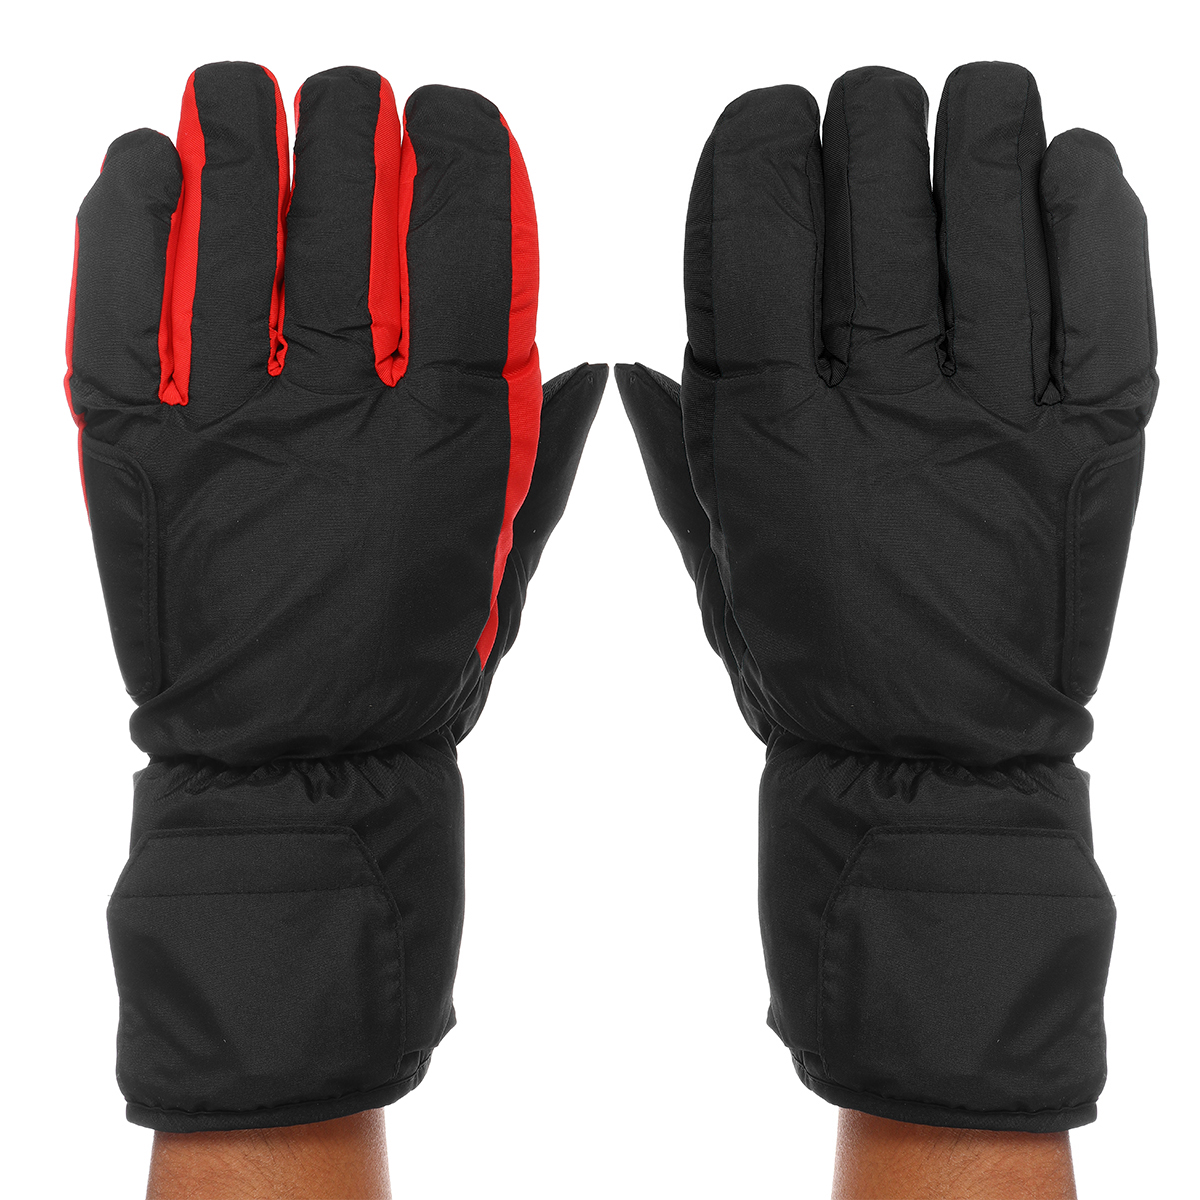 45V-Smart-Electric-Heated-Gloves-Winter-Ski-Cycling-Keep-Warm-Battery-Powered-Heating-Gloves-5-Finge-1771505-3